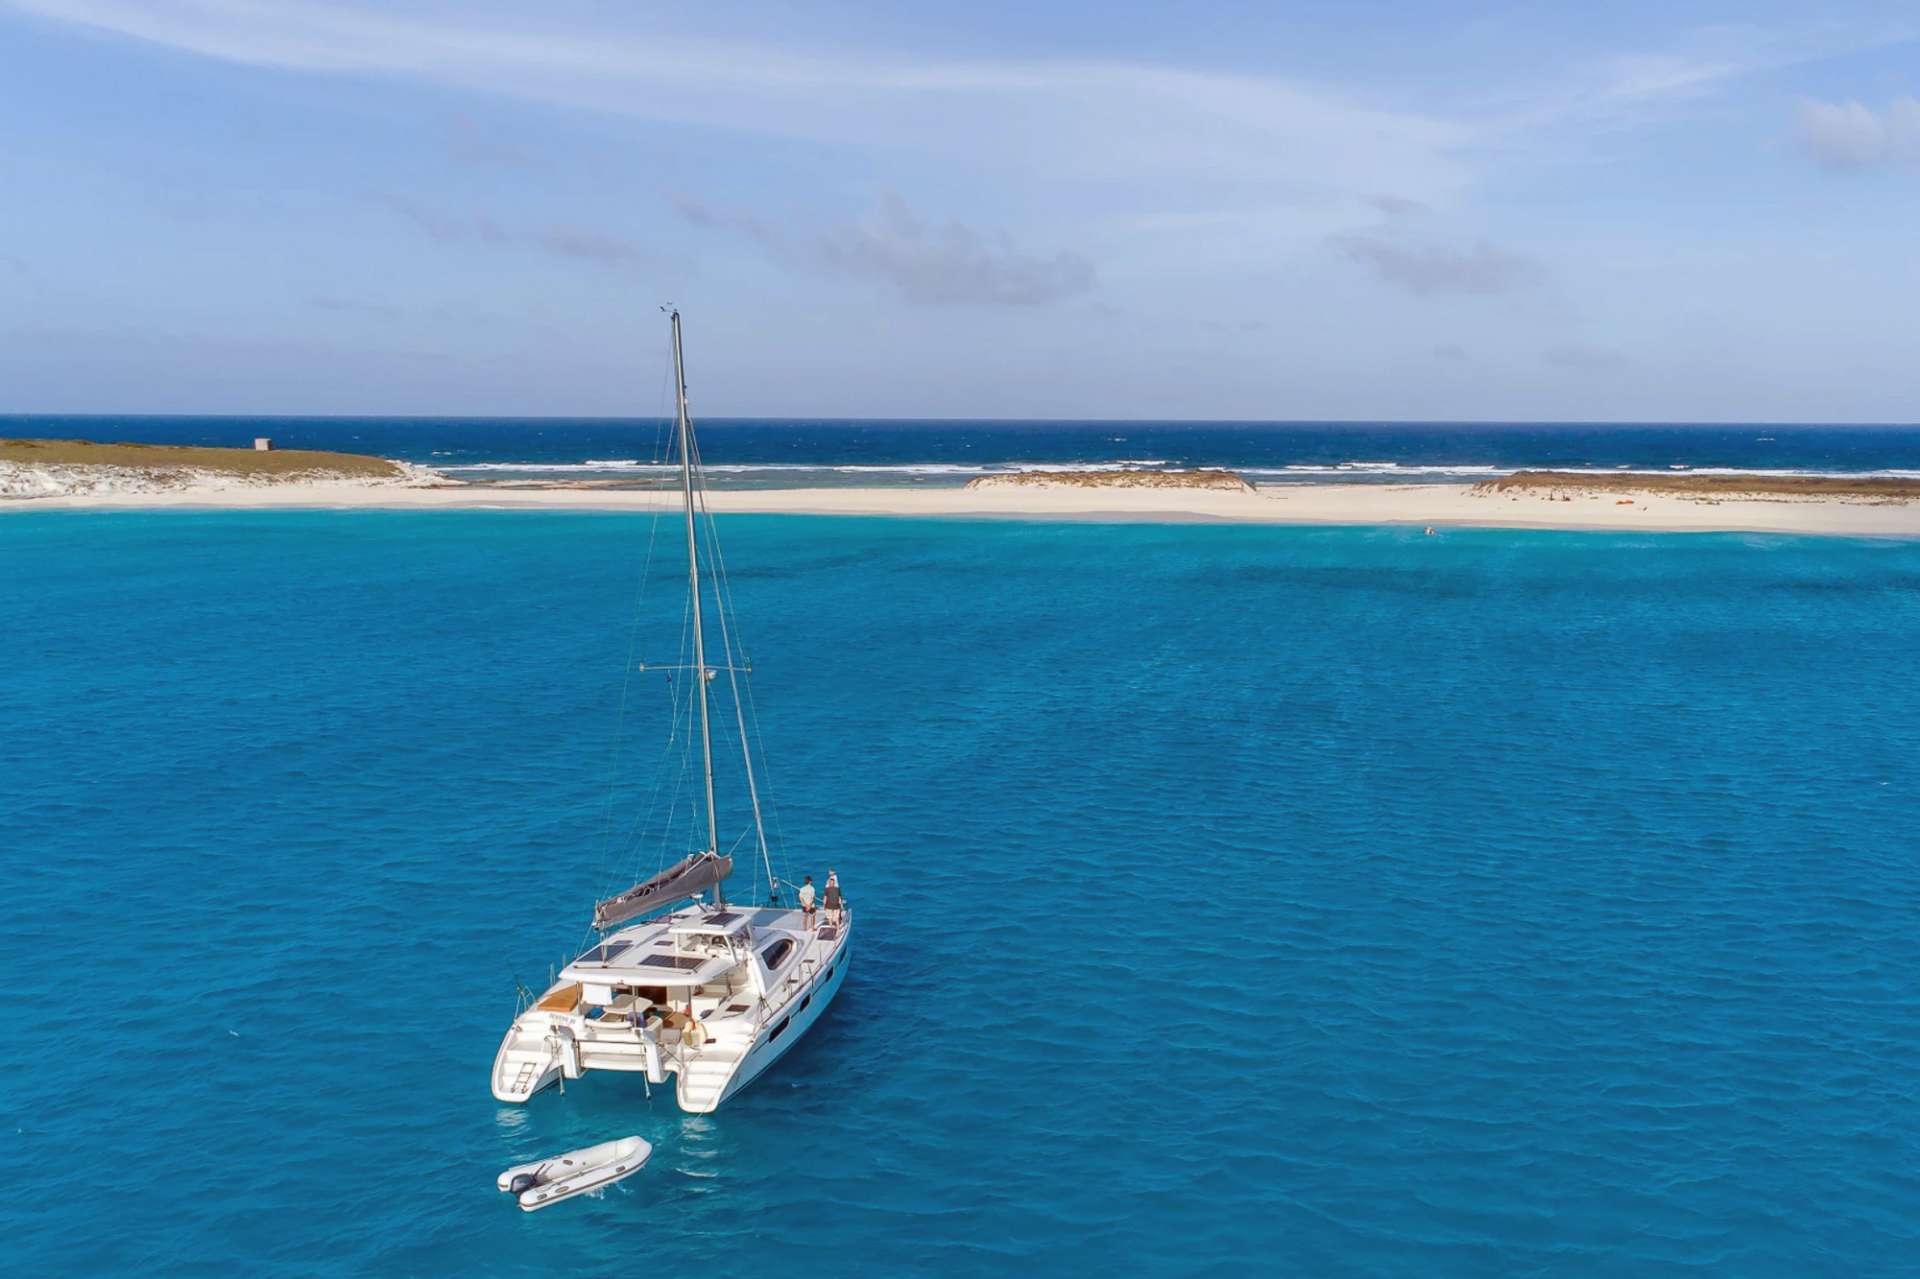 DESTINY III Yacht Charter - At Anchor